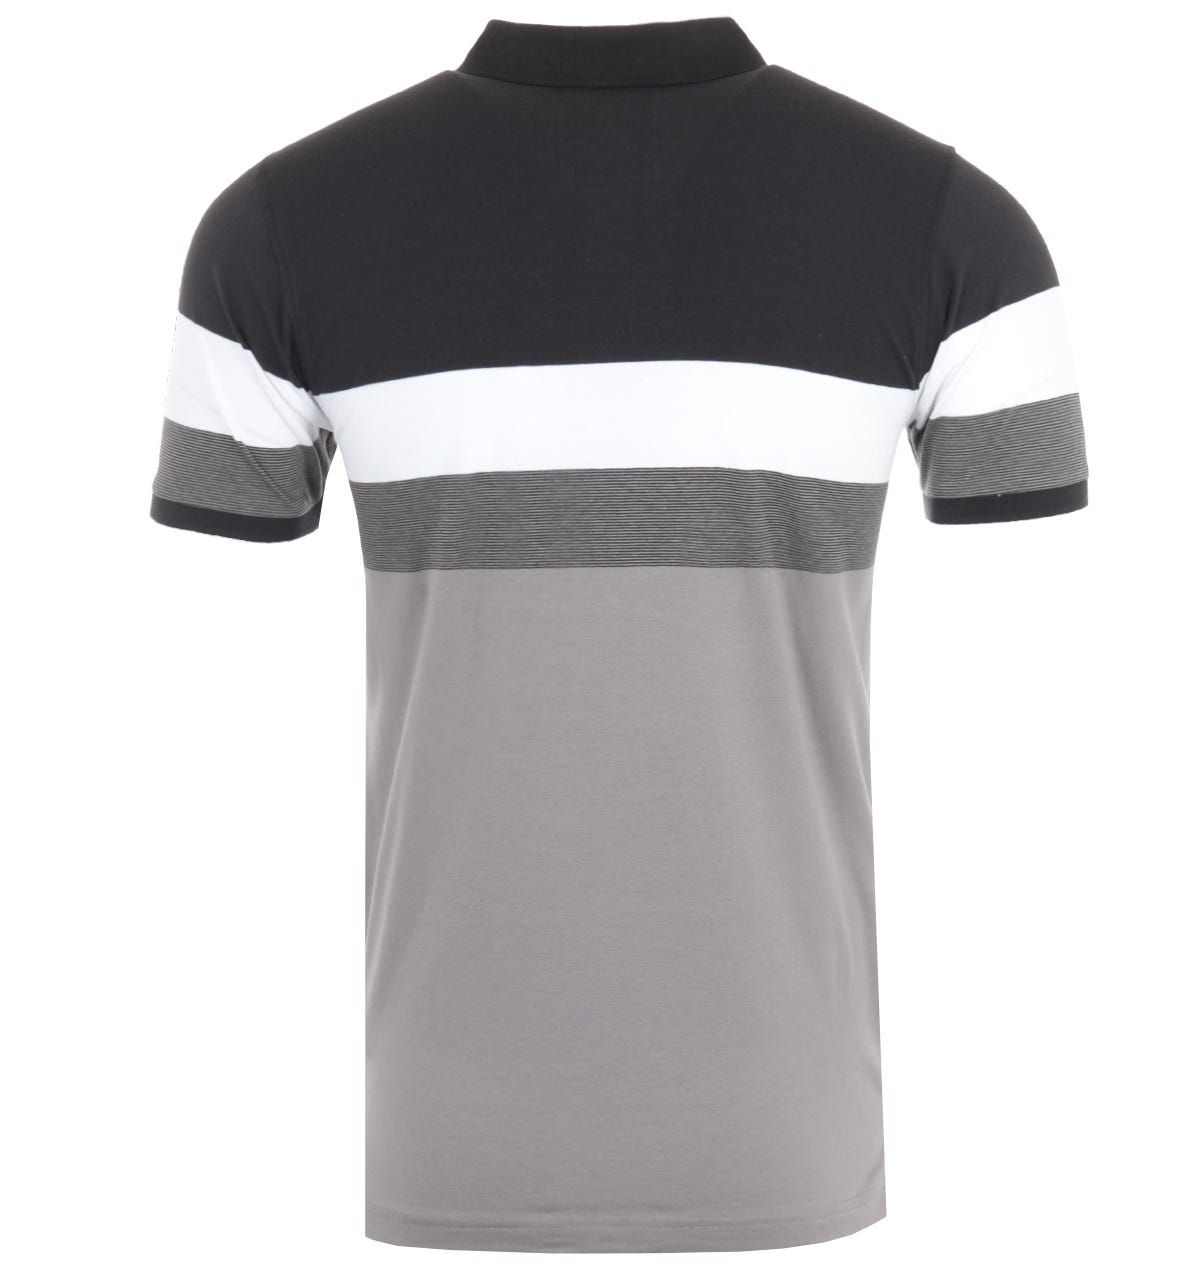 Luke 1977 is, without a doubt, the go-to brand if you\'re after well crafted, witty and masculine products. Finished with the signature Luke Lion logo, you\'re looking at one of the UK\'s top contemporary menswear brands.The Shuffle Polo Shirt is crafted from a soft stretch cotton jersey. In a classic polo shirt design with a colour block pattern with wide and thin contrasting stripes across the chest. Featuring a two button placket and short sleeves. Finished with the iconic Luke Lion embroidered at the chest.Regular FitStretch Cotton JerseyRibbed Polo CollarTwo Button PlacketShort SleevesColorblock Stripe DesignVented SeamsLuke 1977 BrandingStyle & Fit:Regular FitFits True to SizeComposition & Care:96% Cotton4% ElastaneMachine Wash